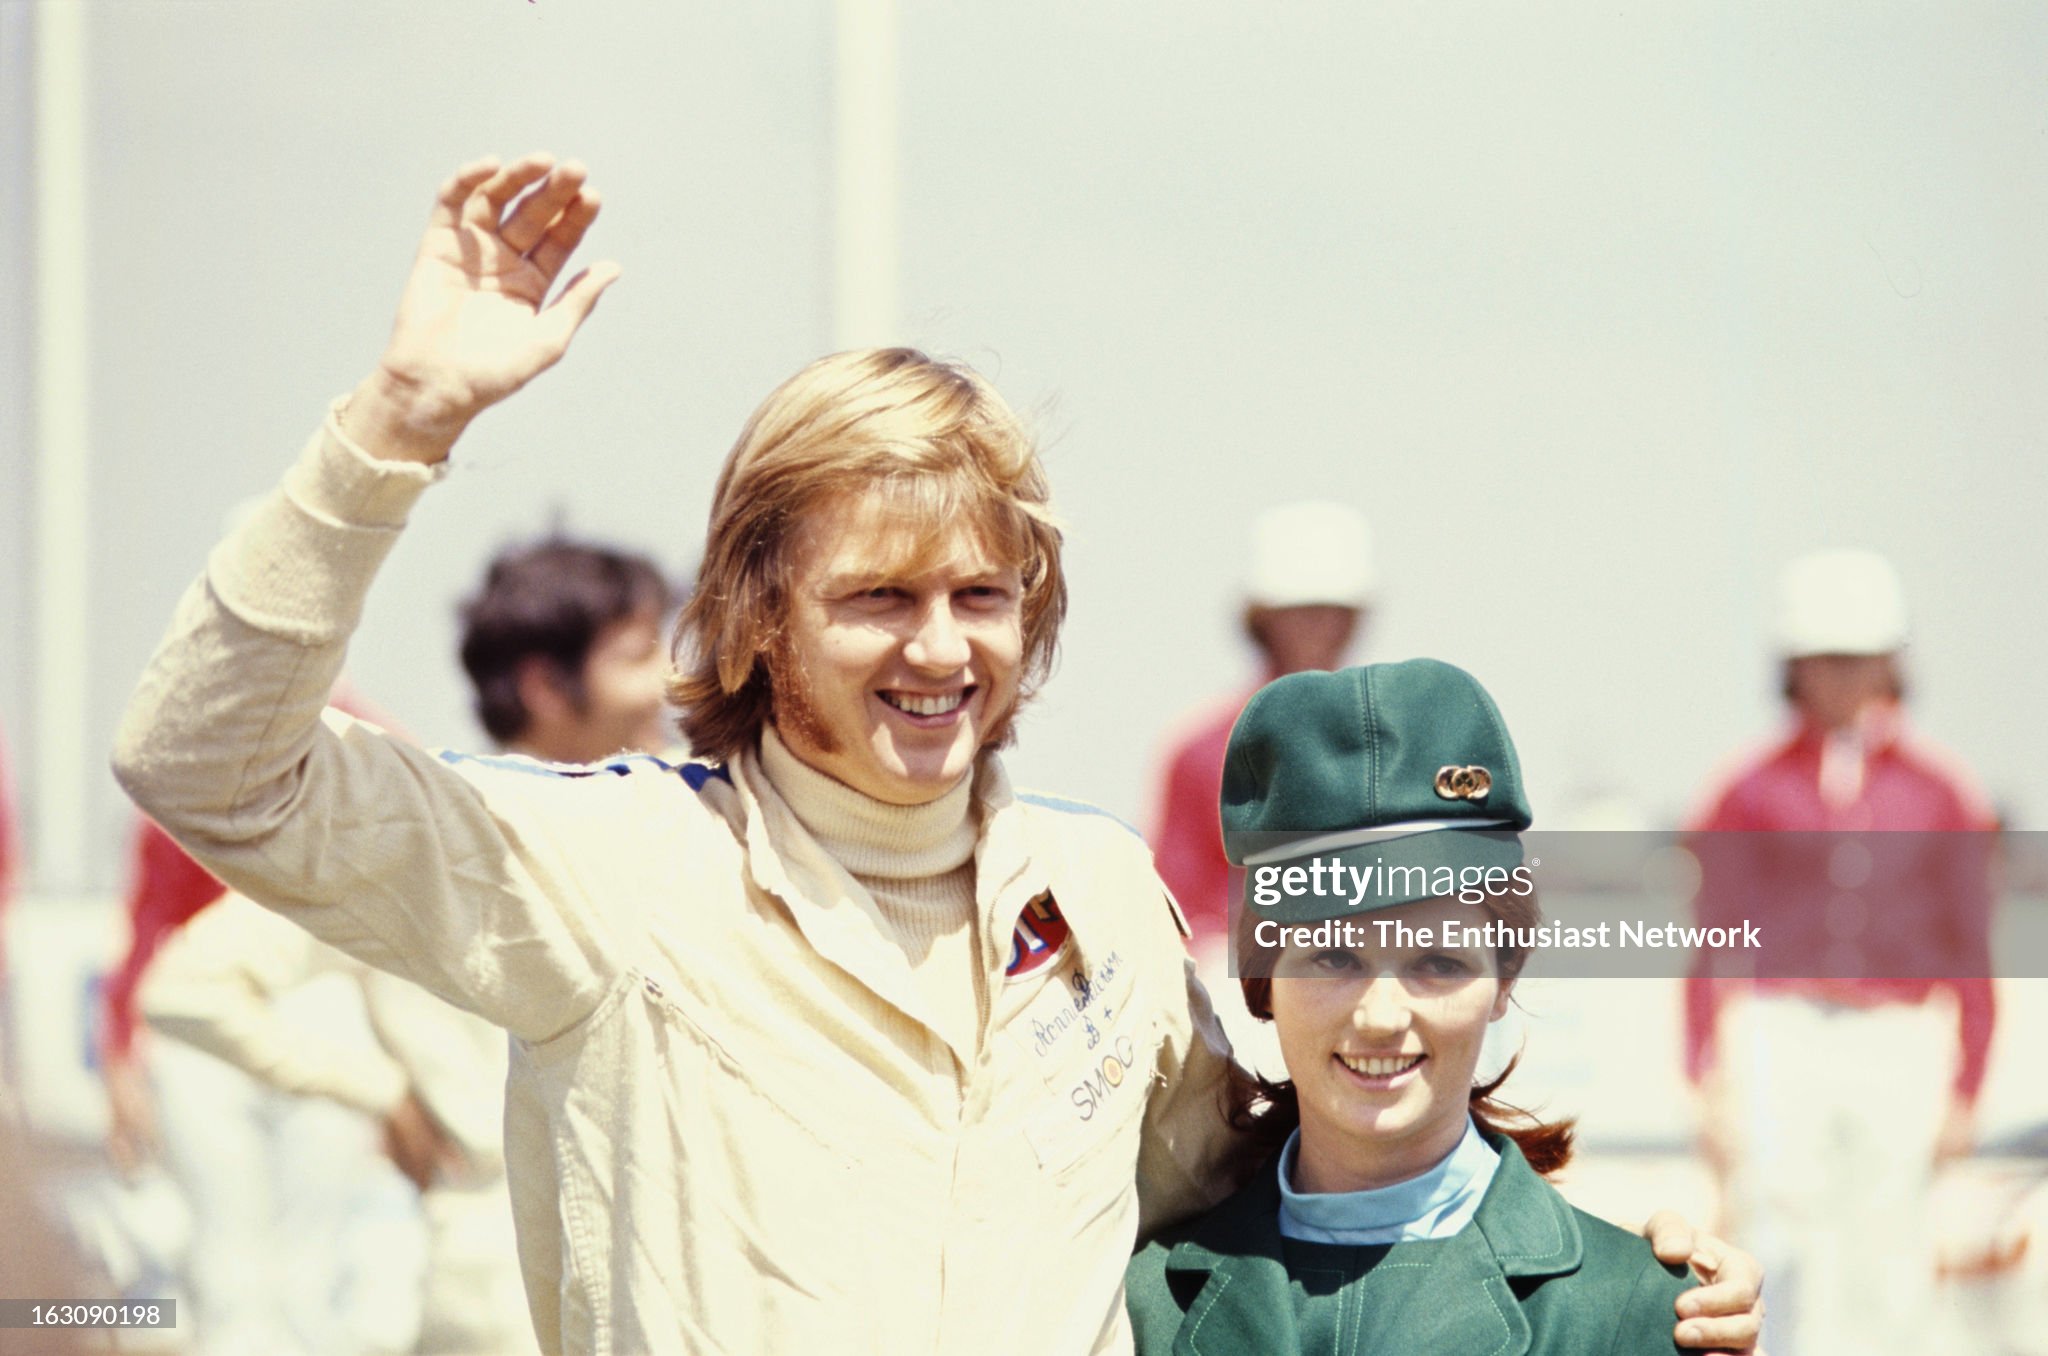 Ronnie Peterson of March racing stands with a grid girl at the Questor Grand Prix at the Ontario Motor Speedway in California, USA, on 30 March 1971. 